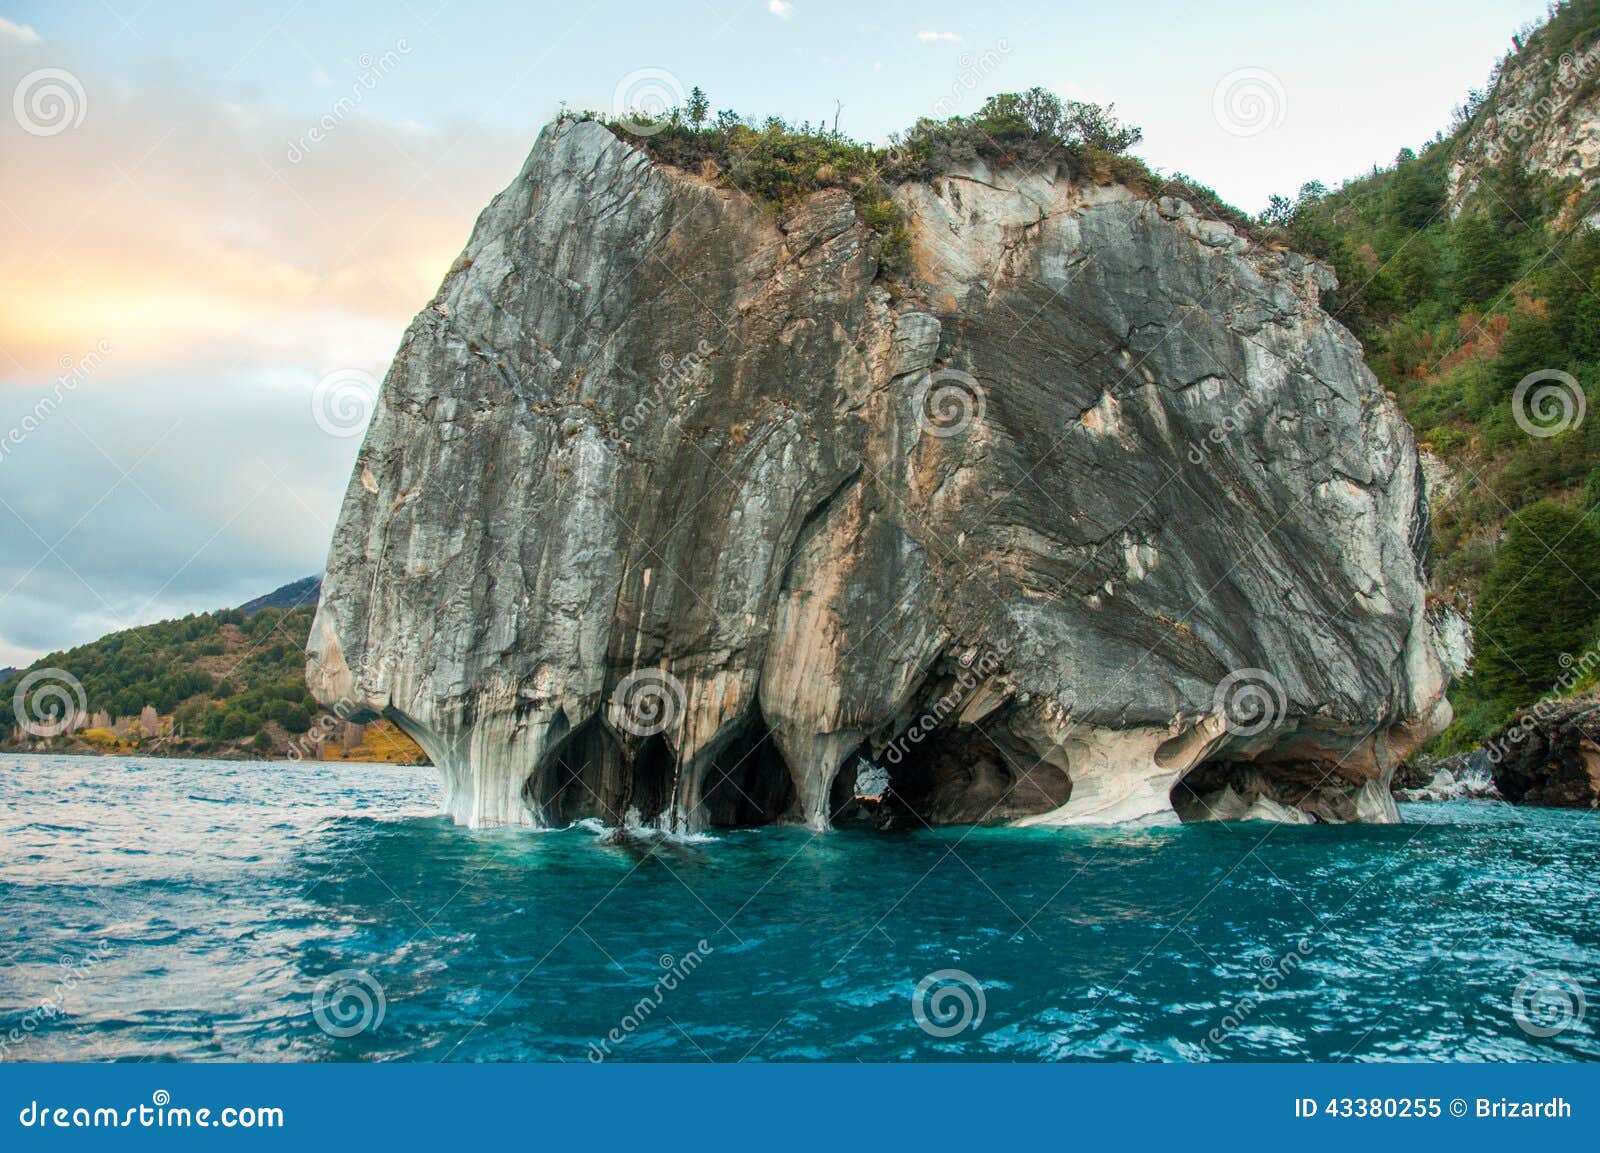 marmol cathedral rock formation, carretera austral, highway 7, c